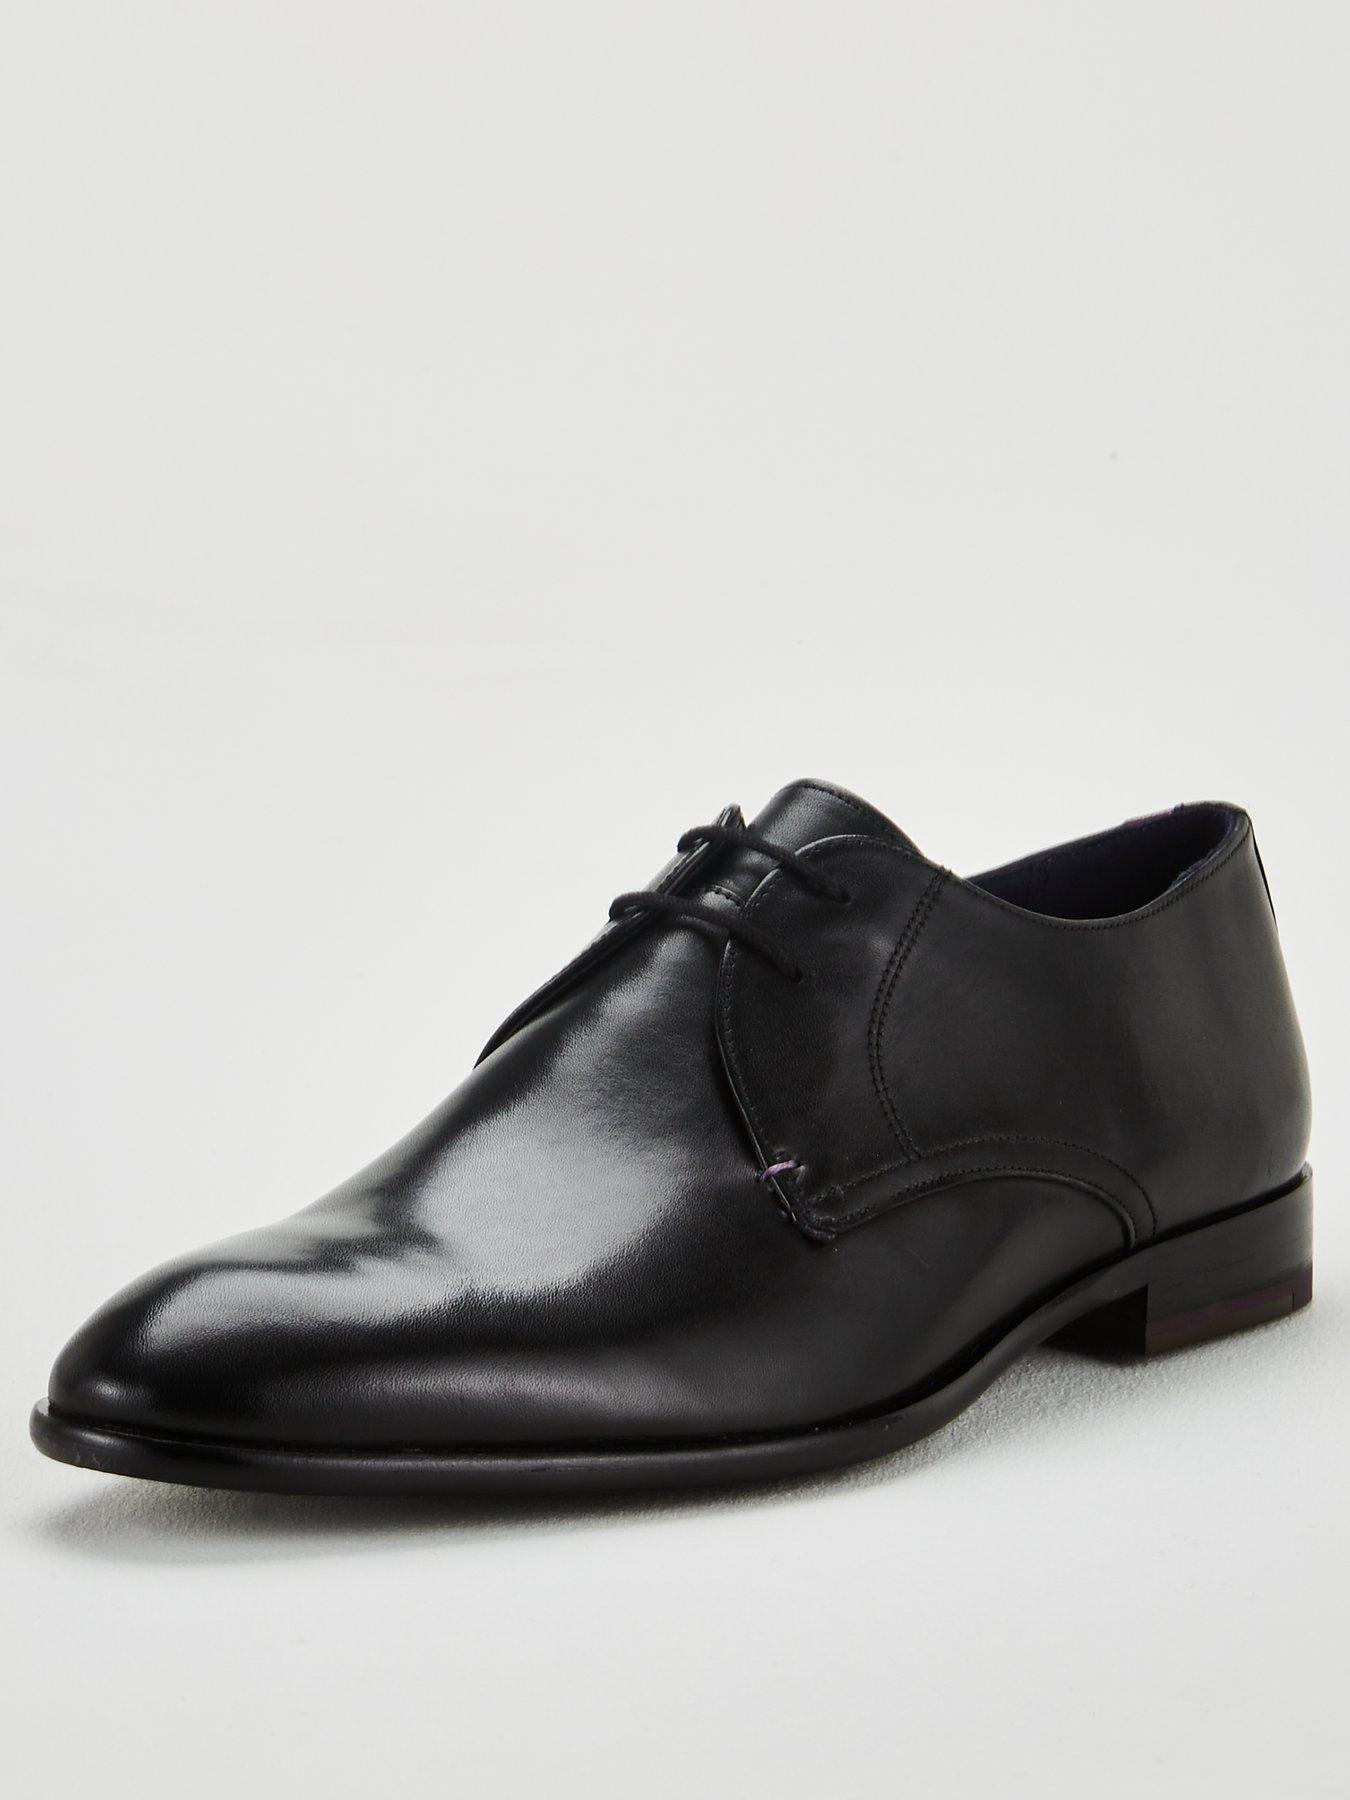 Mens Formal Shoes | Formal Shoes for 